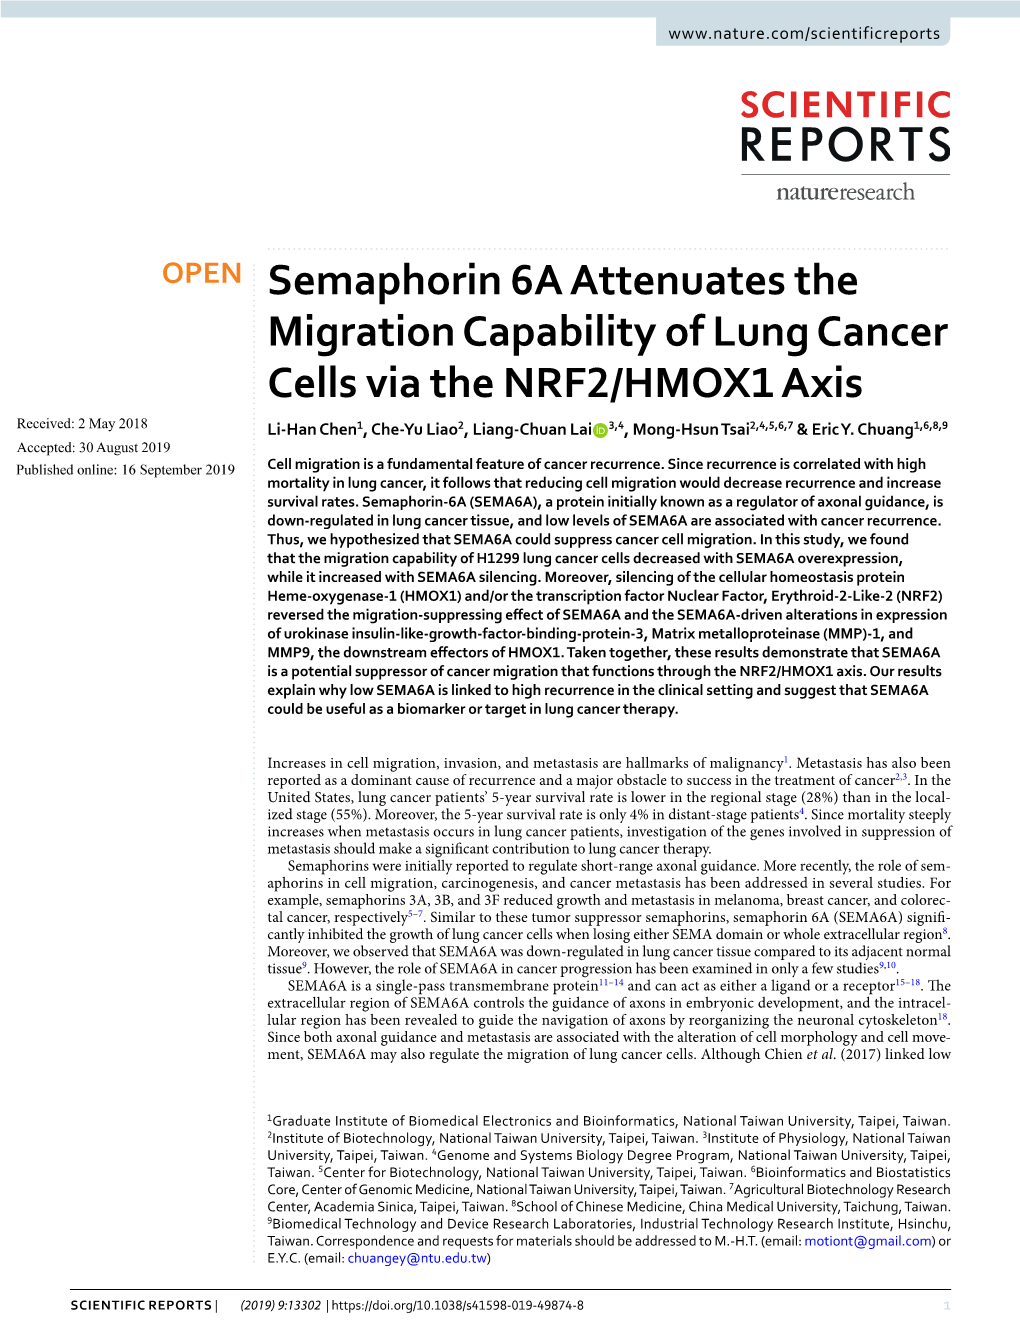 Semaphorin 6A Attenuates the Migration Capability of Lung